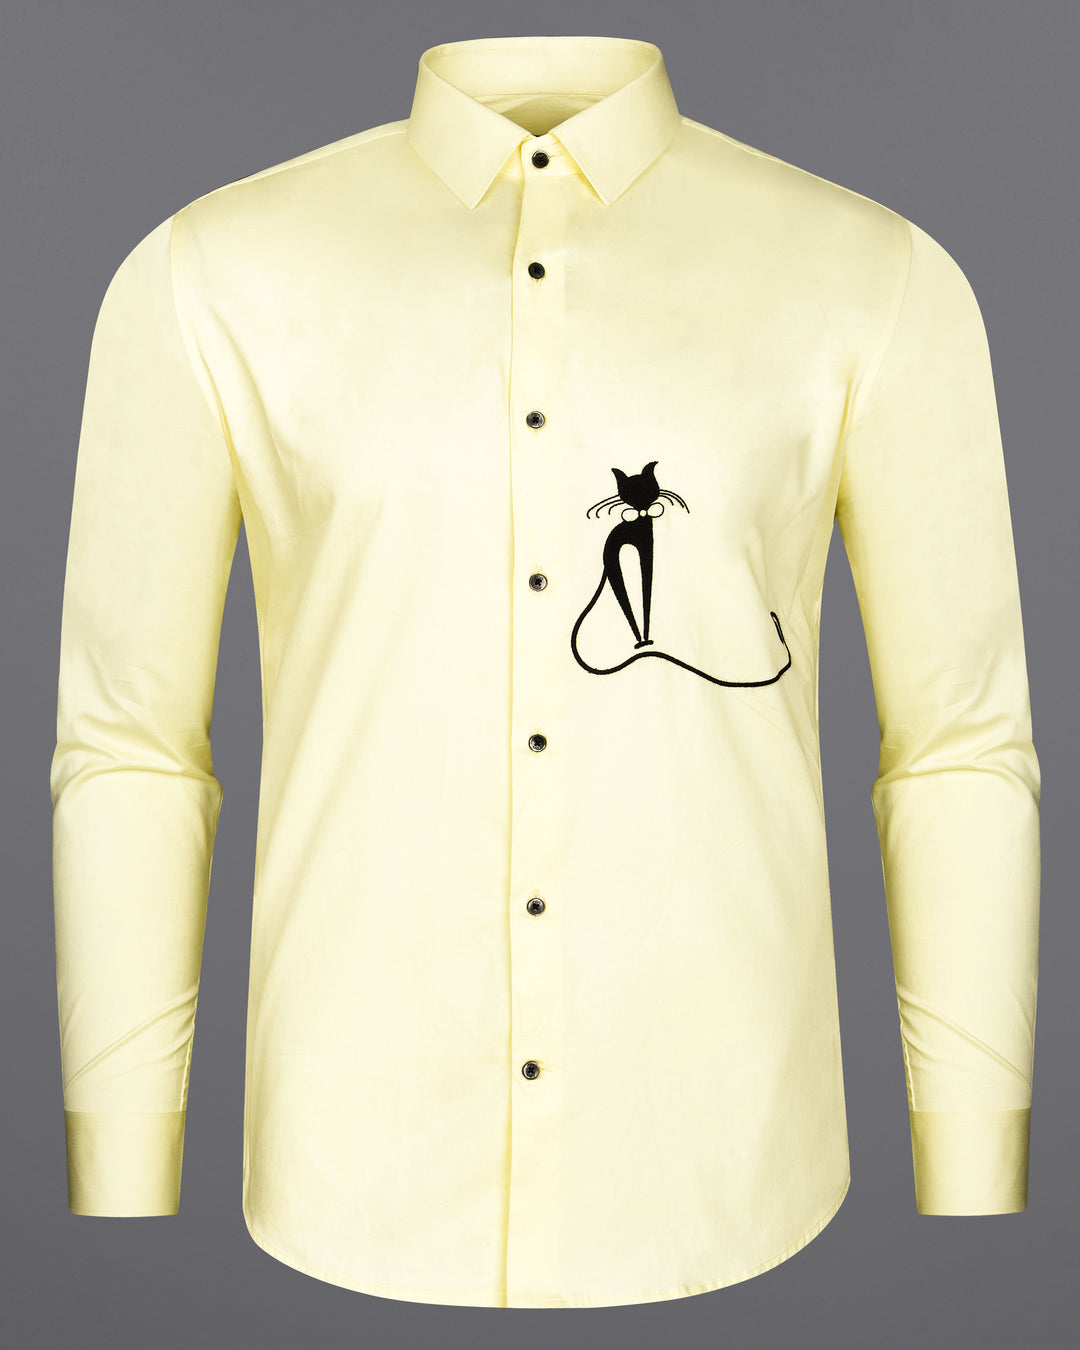 CITRINE YELLOW SUBTLE SHEEN WITH CAT EMBROIDERED SUPER SOFT PREMIUM COTTON SHIRT